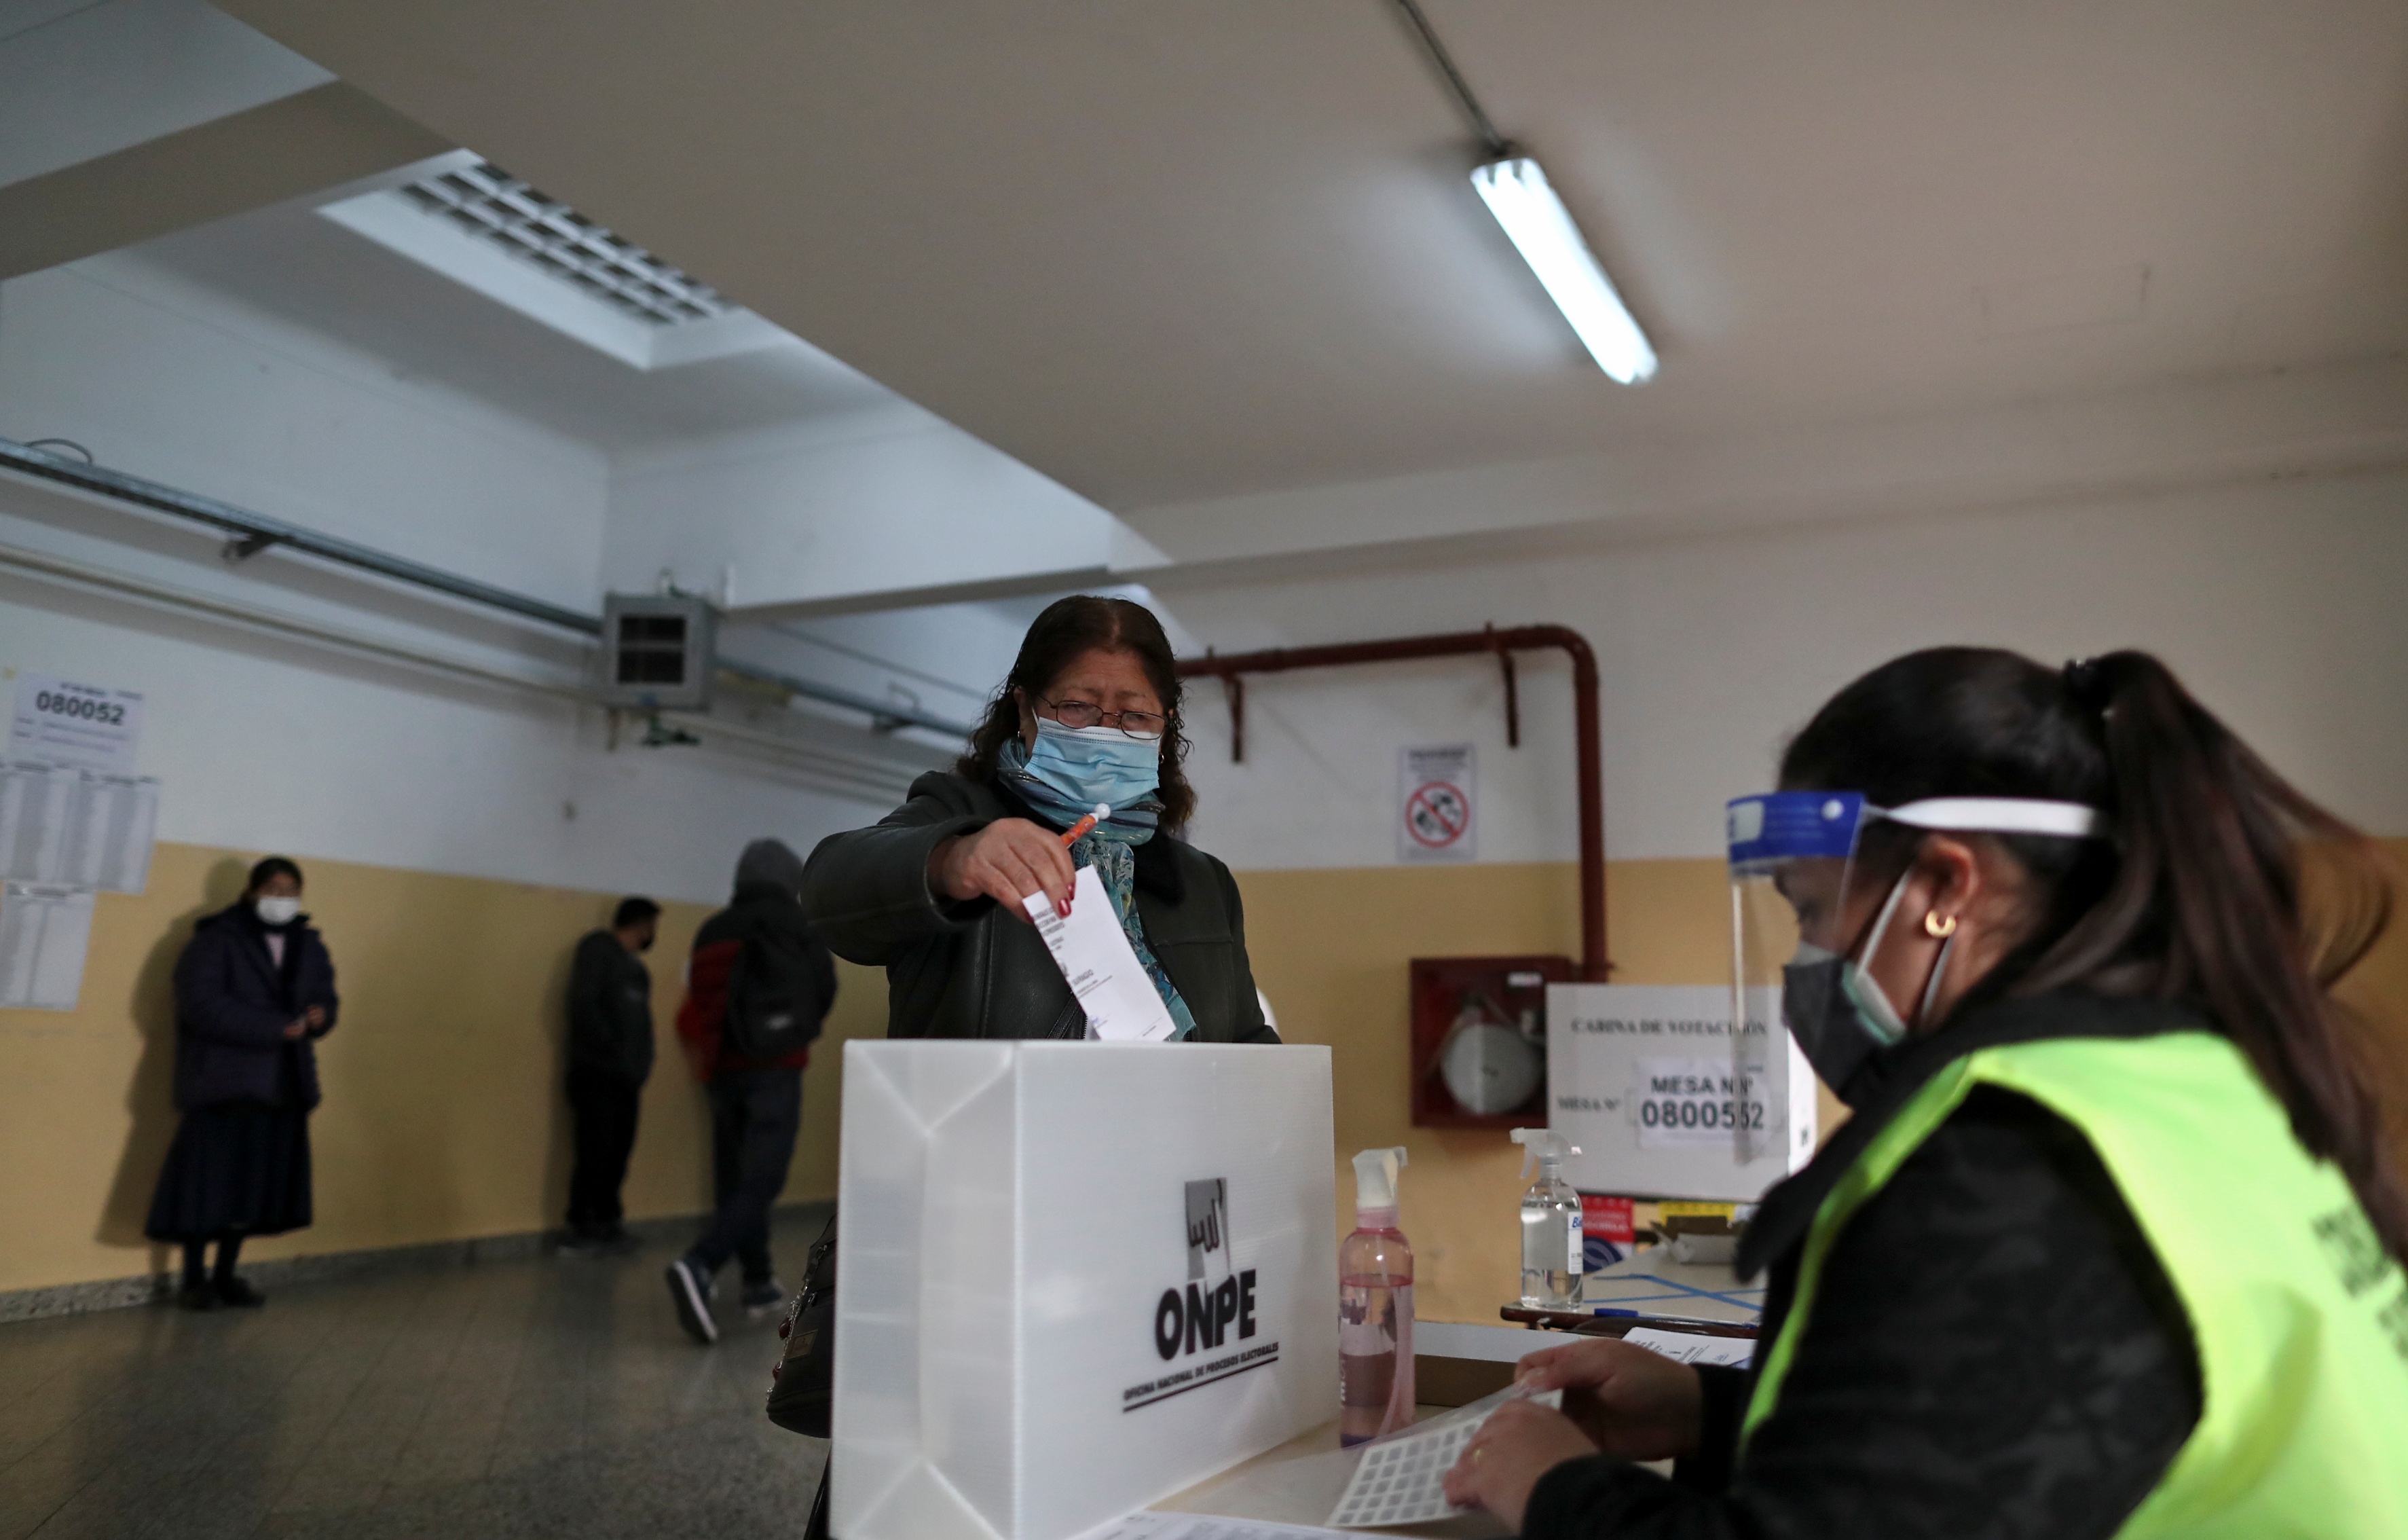 A Peruvian woman residing in Argentina casts her vote at a polling station in a public school, during her country's run-off elections between front runner socialist candidate Pedro Castillo and his right-wing opponent Keiko Fujimori, in Buenos Aires, Argentina June 6, 2021. REUTERS/Agustin Marcarian